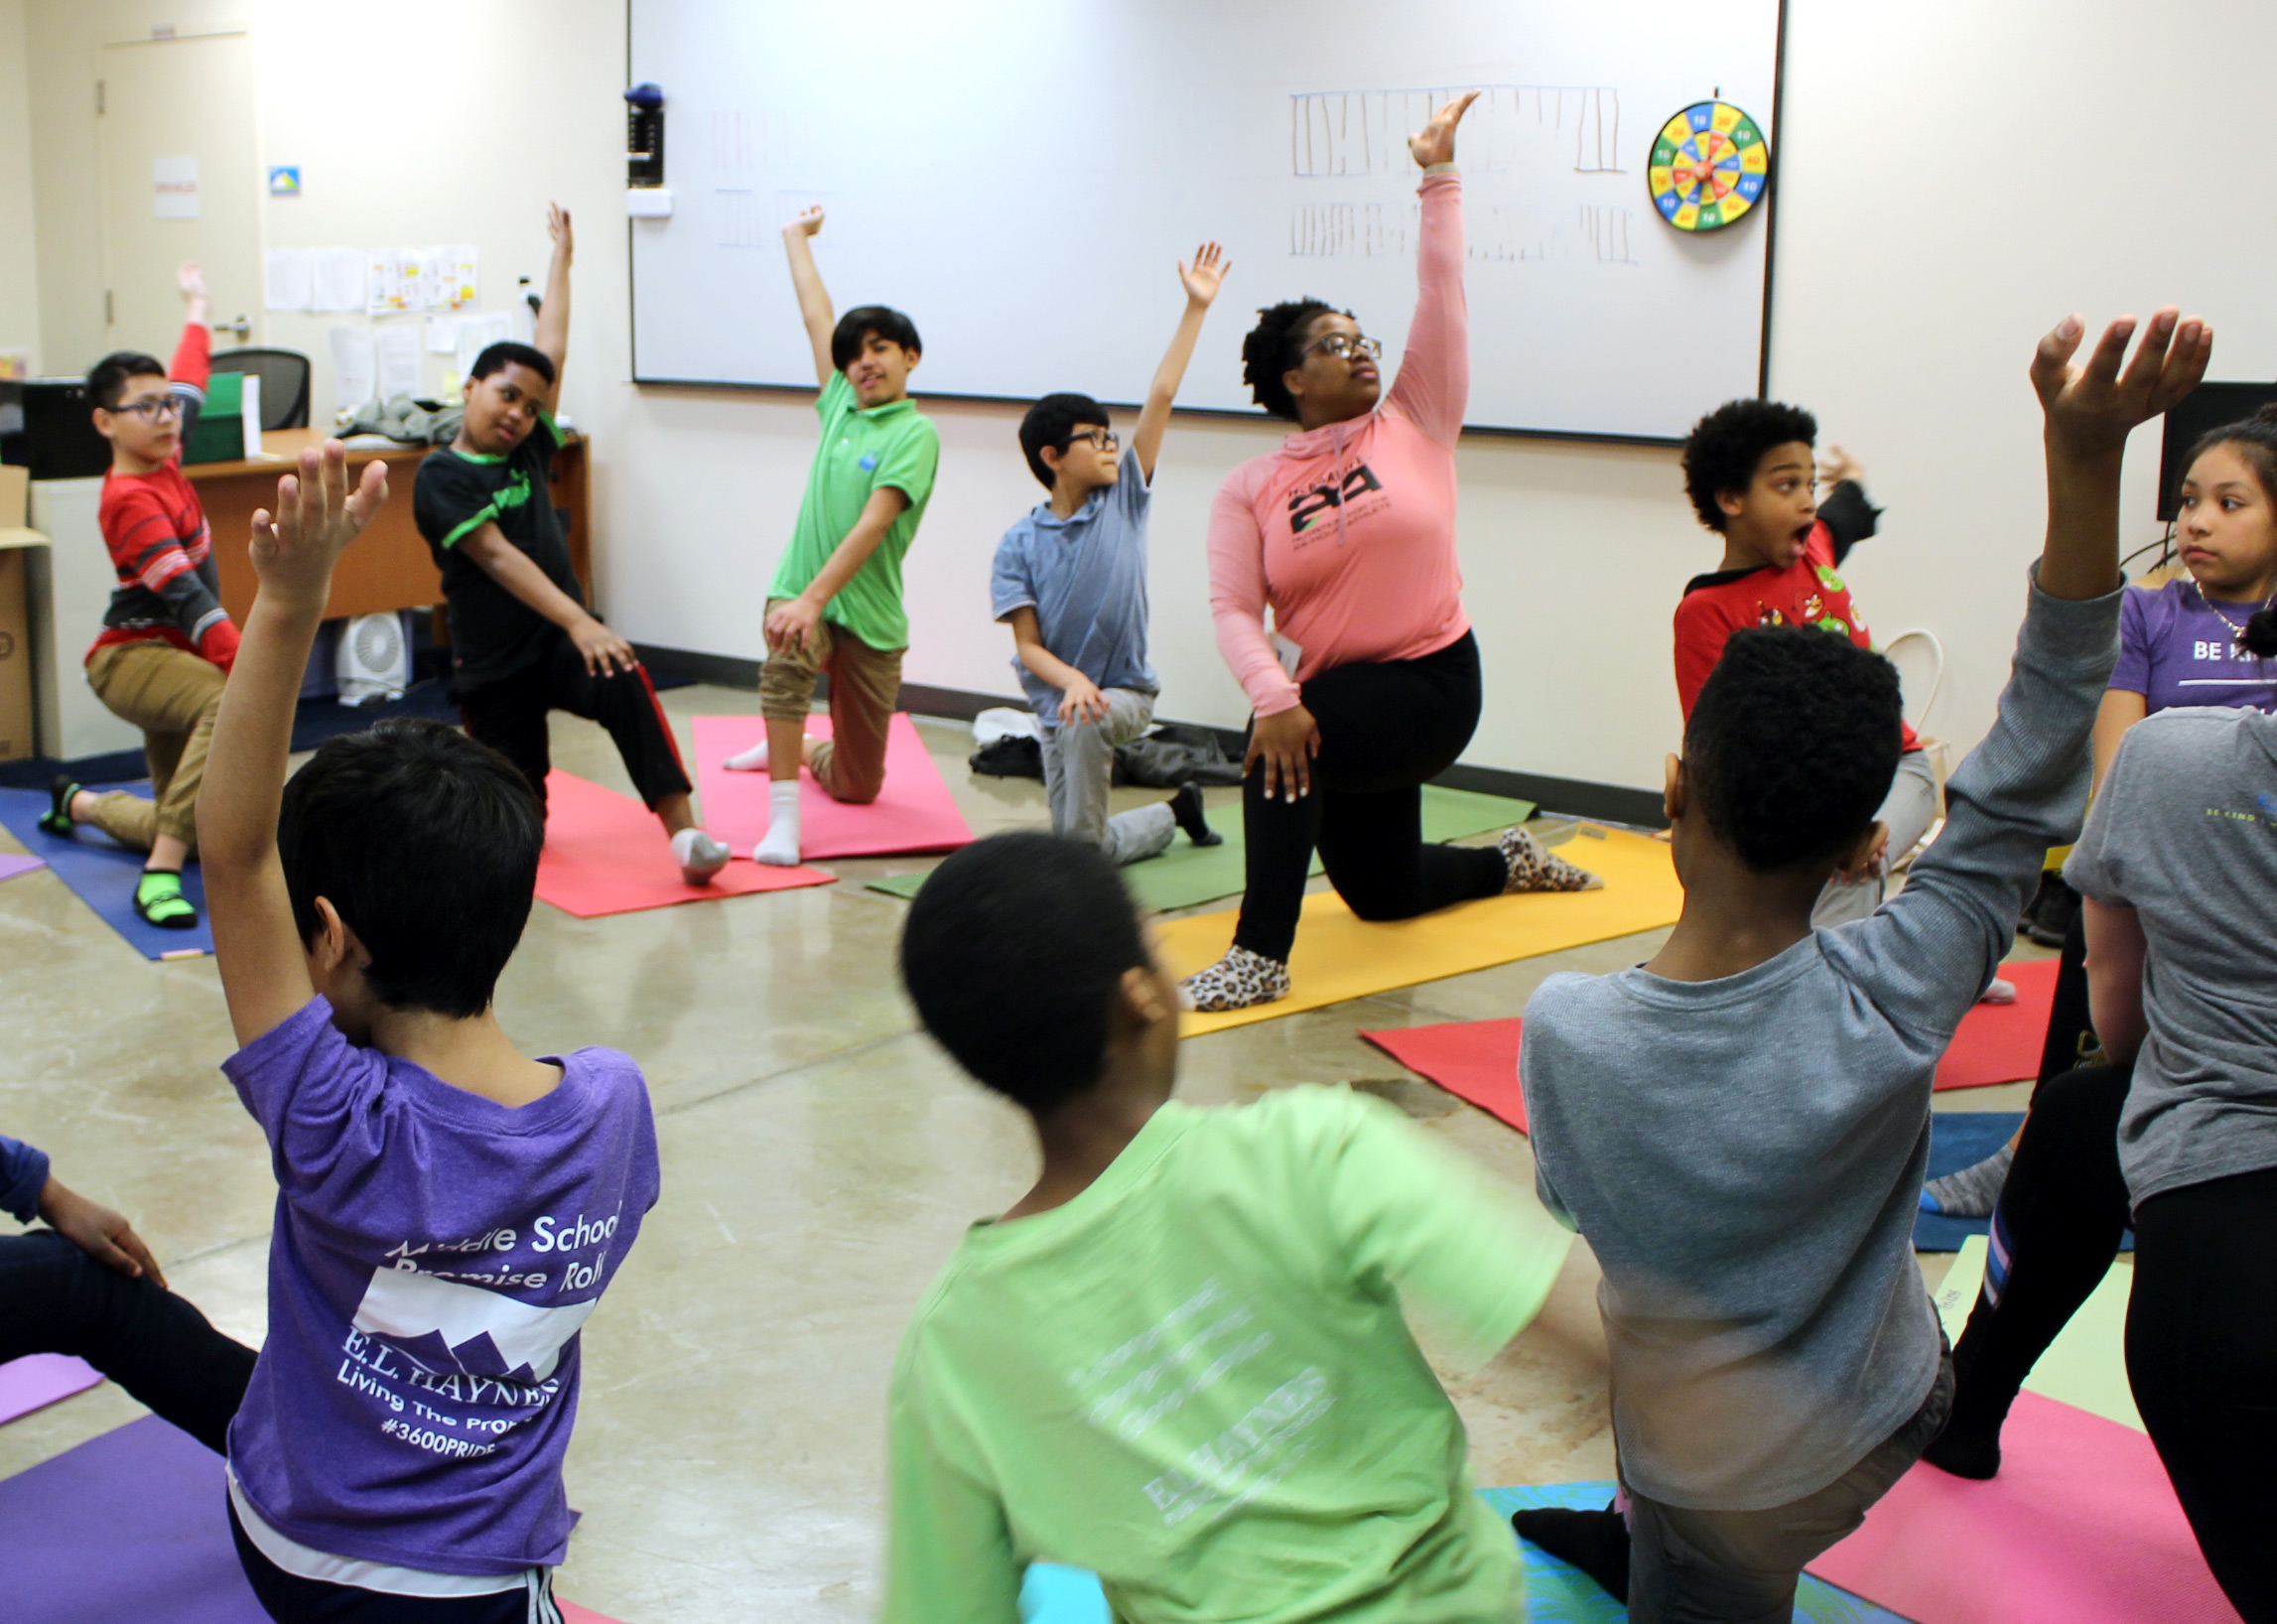 Middle school students learn new yoga poses and practice mindfulness during our annual campus-wide Wellness Day.